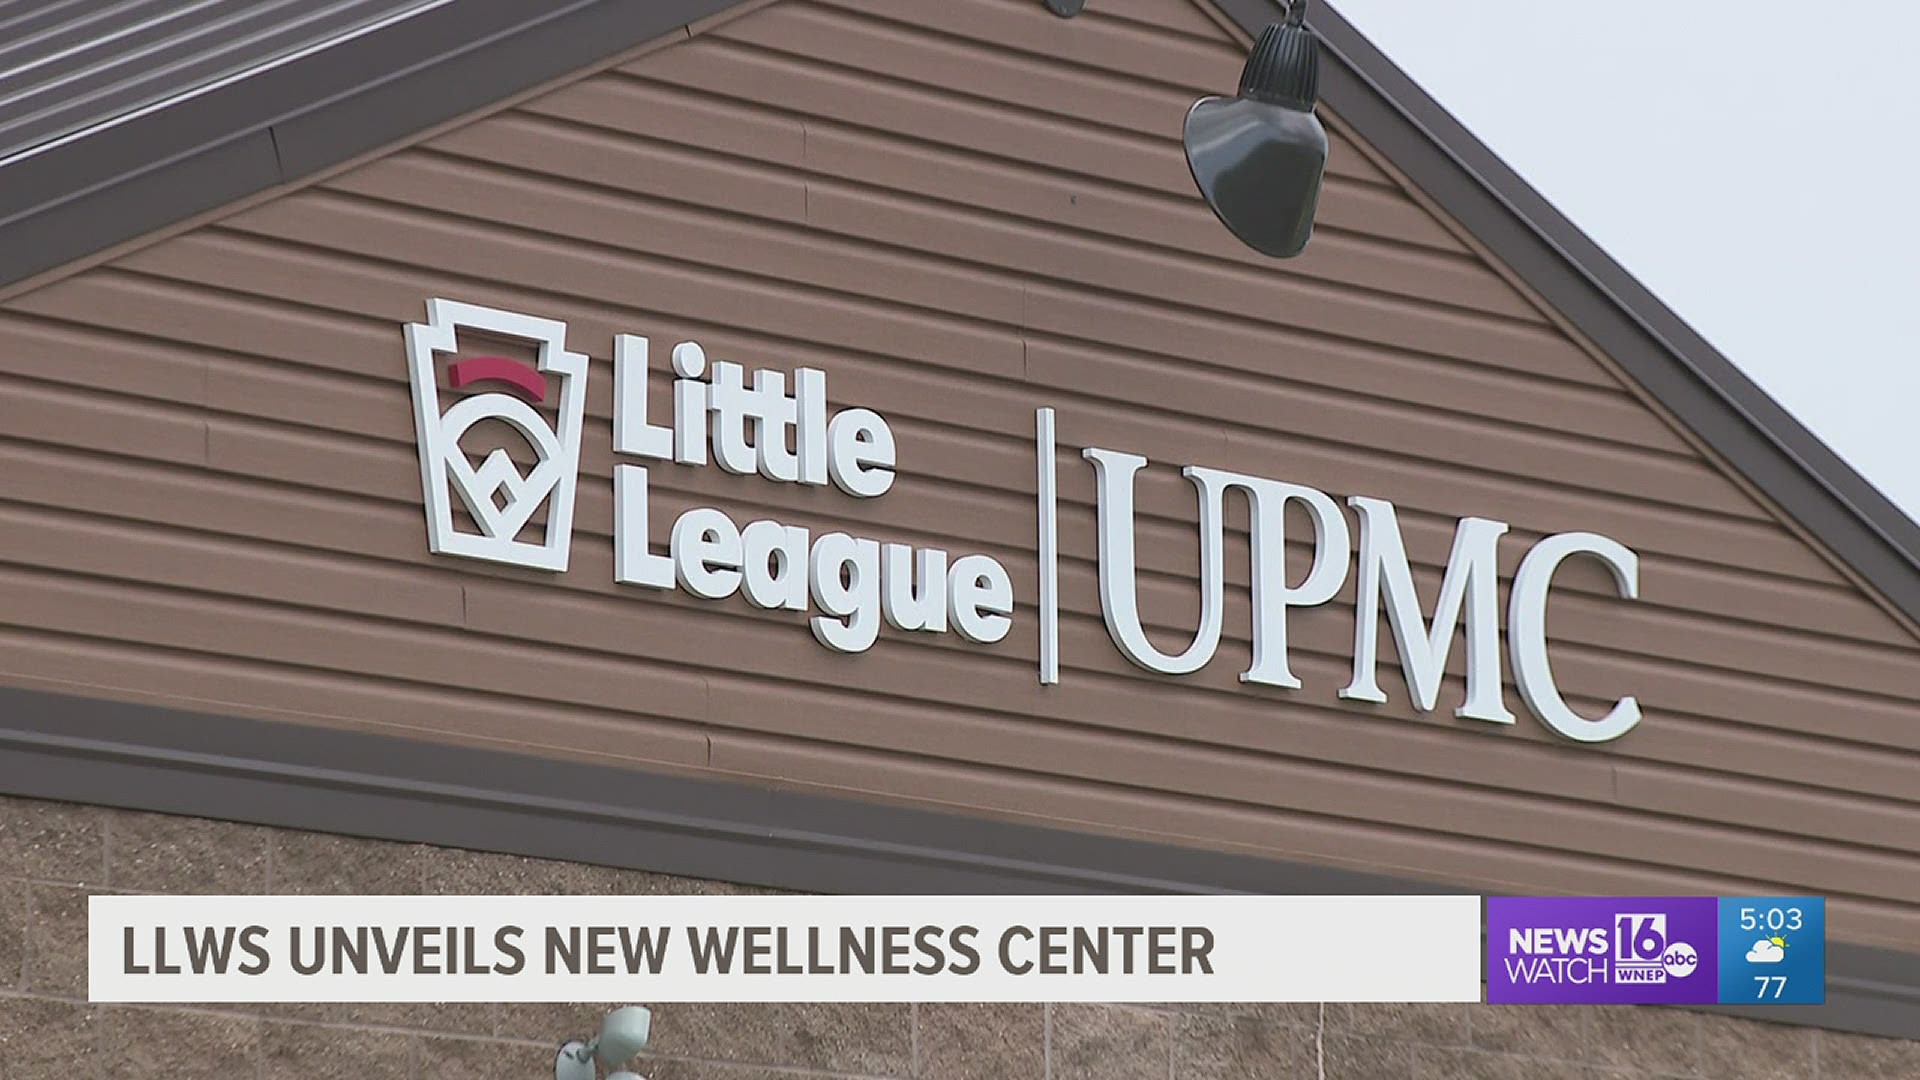 Little League and UPMC unveiled a new facility to provide health care for players and coaches during the World Series next month.